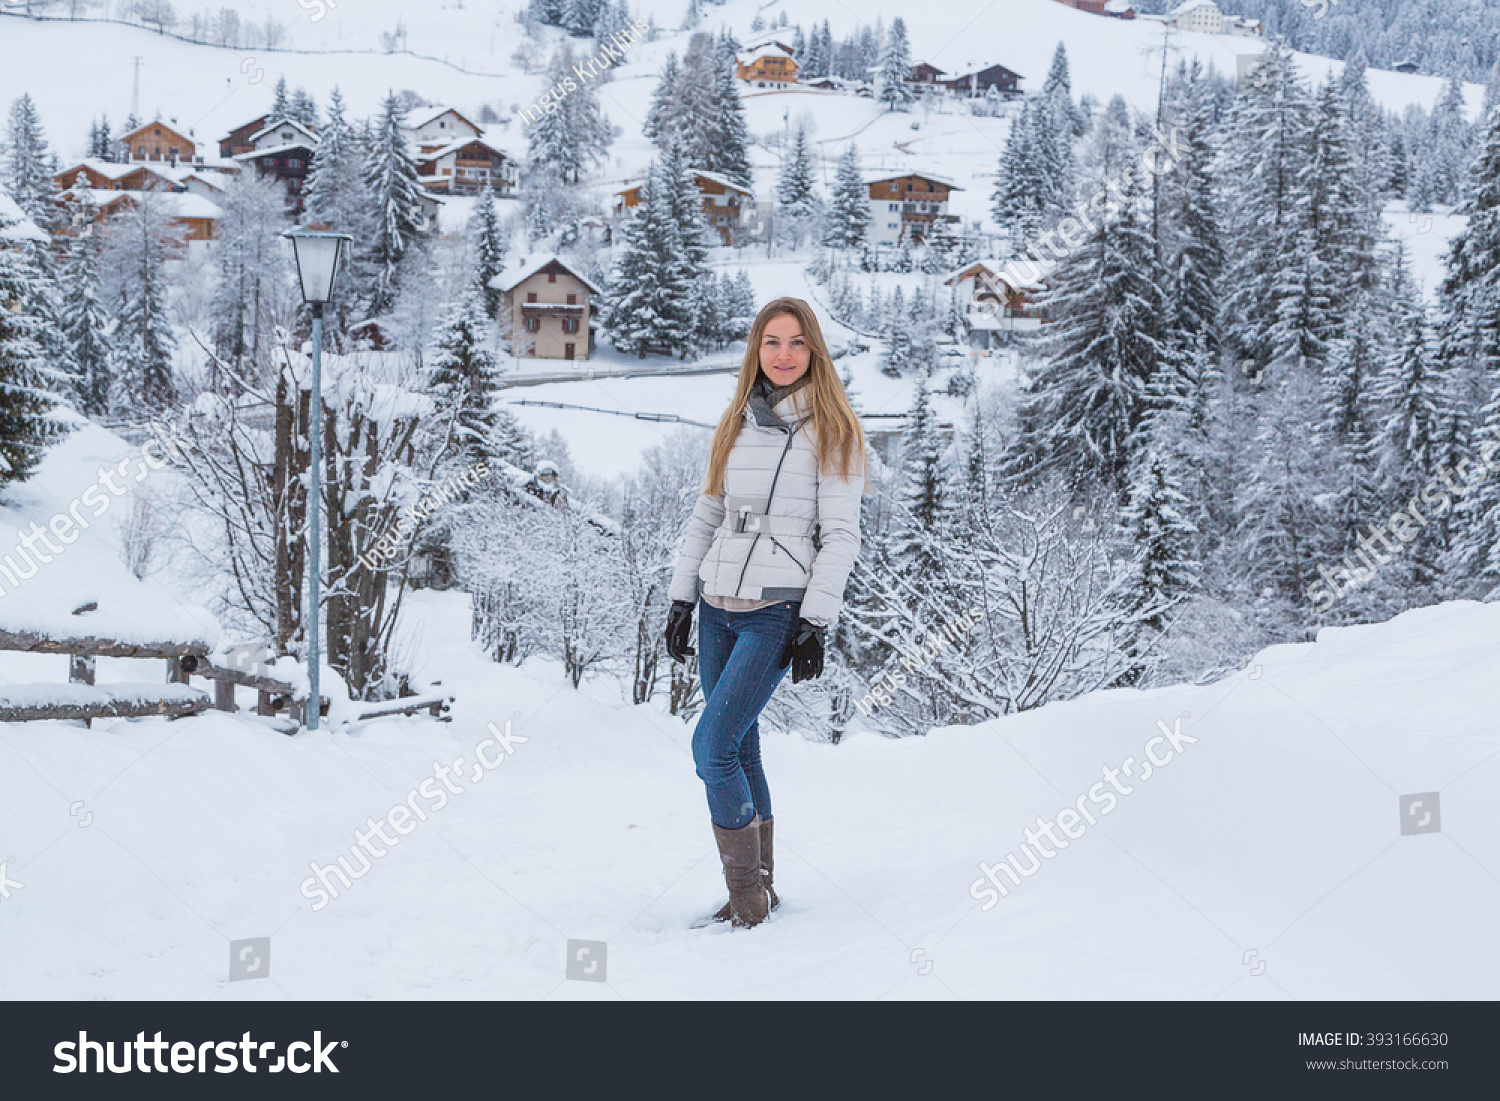 stock-photo-beautiful-girl-standing-in-the-snow-by-the-road-in-a-mountain-village-with-an-amazing-nature-view-393166630.jpg